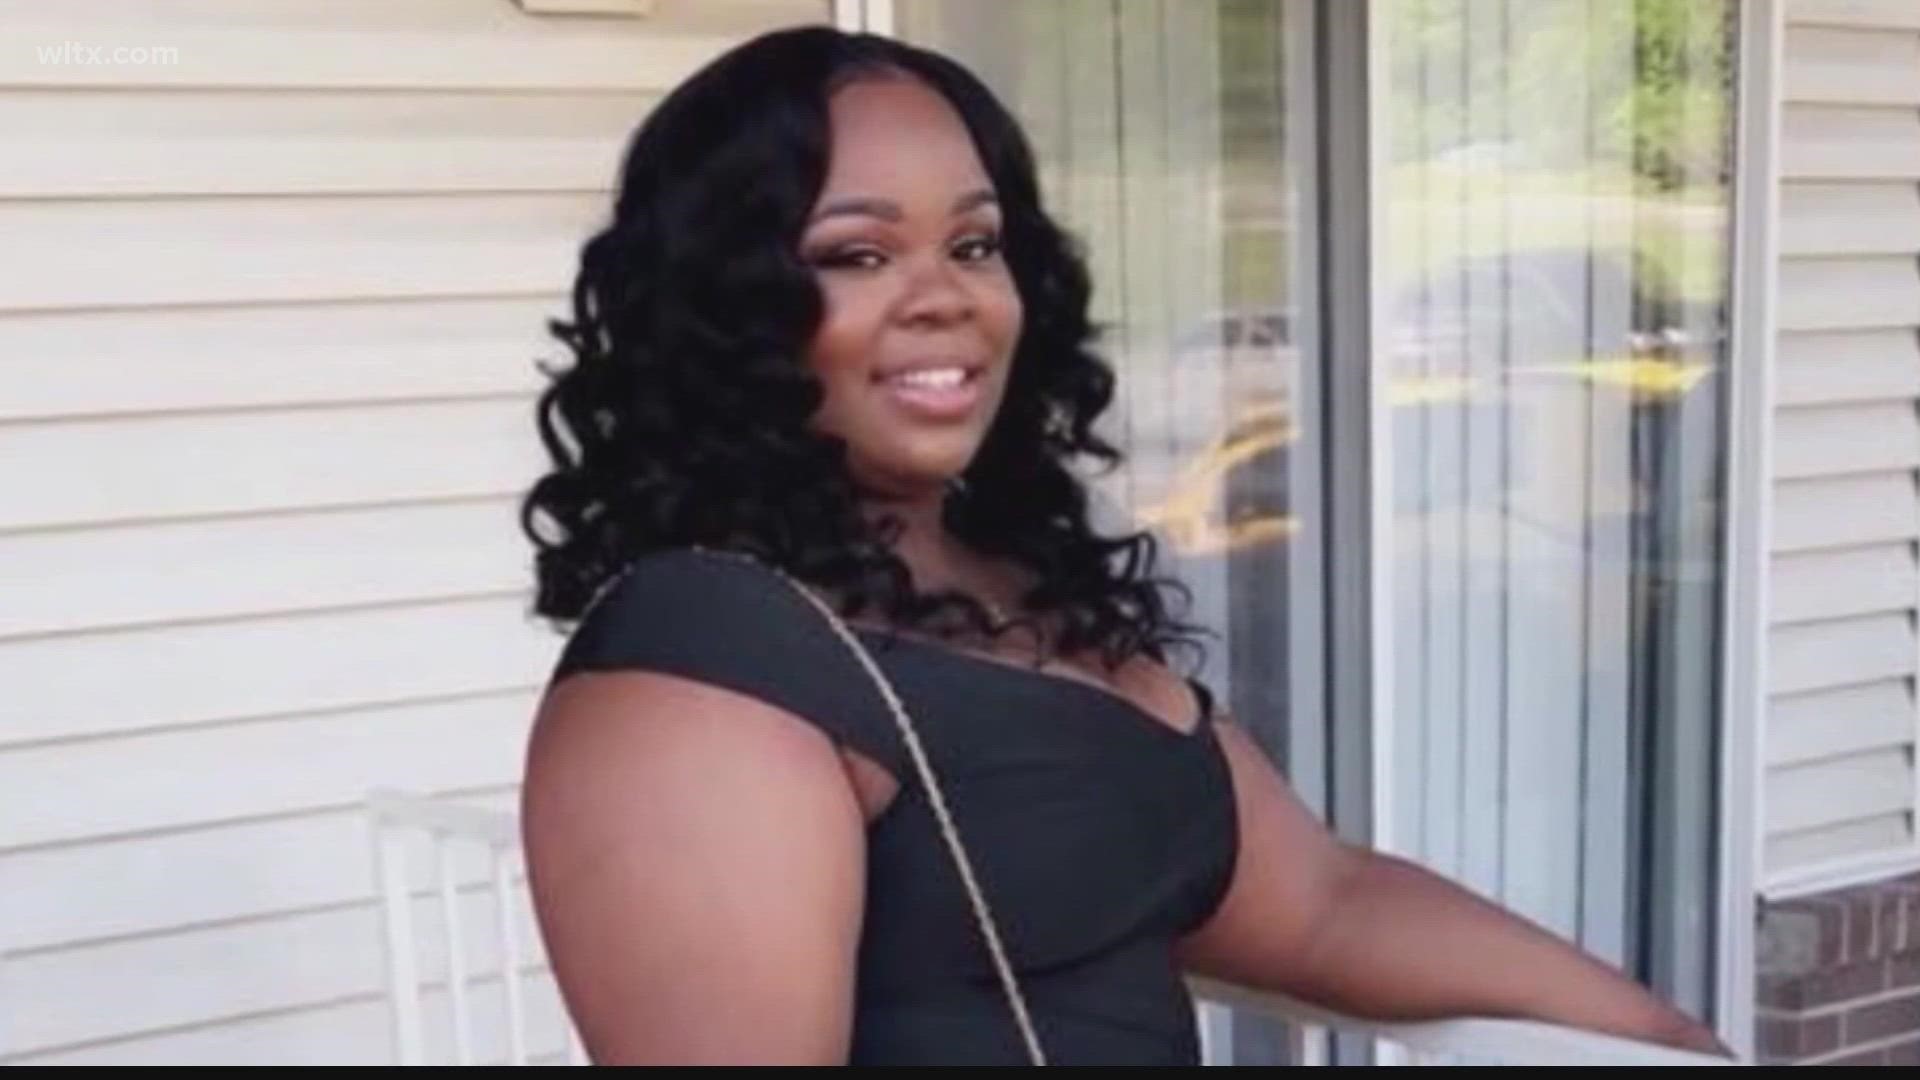 Today the Justice Department filed federal charges against four current and former Louisville Police Officers connected to the 2020 death of Breonna Taylor.